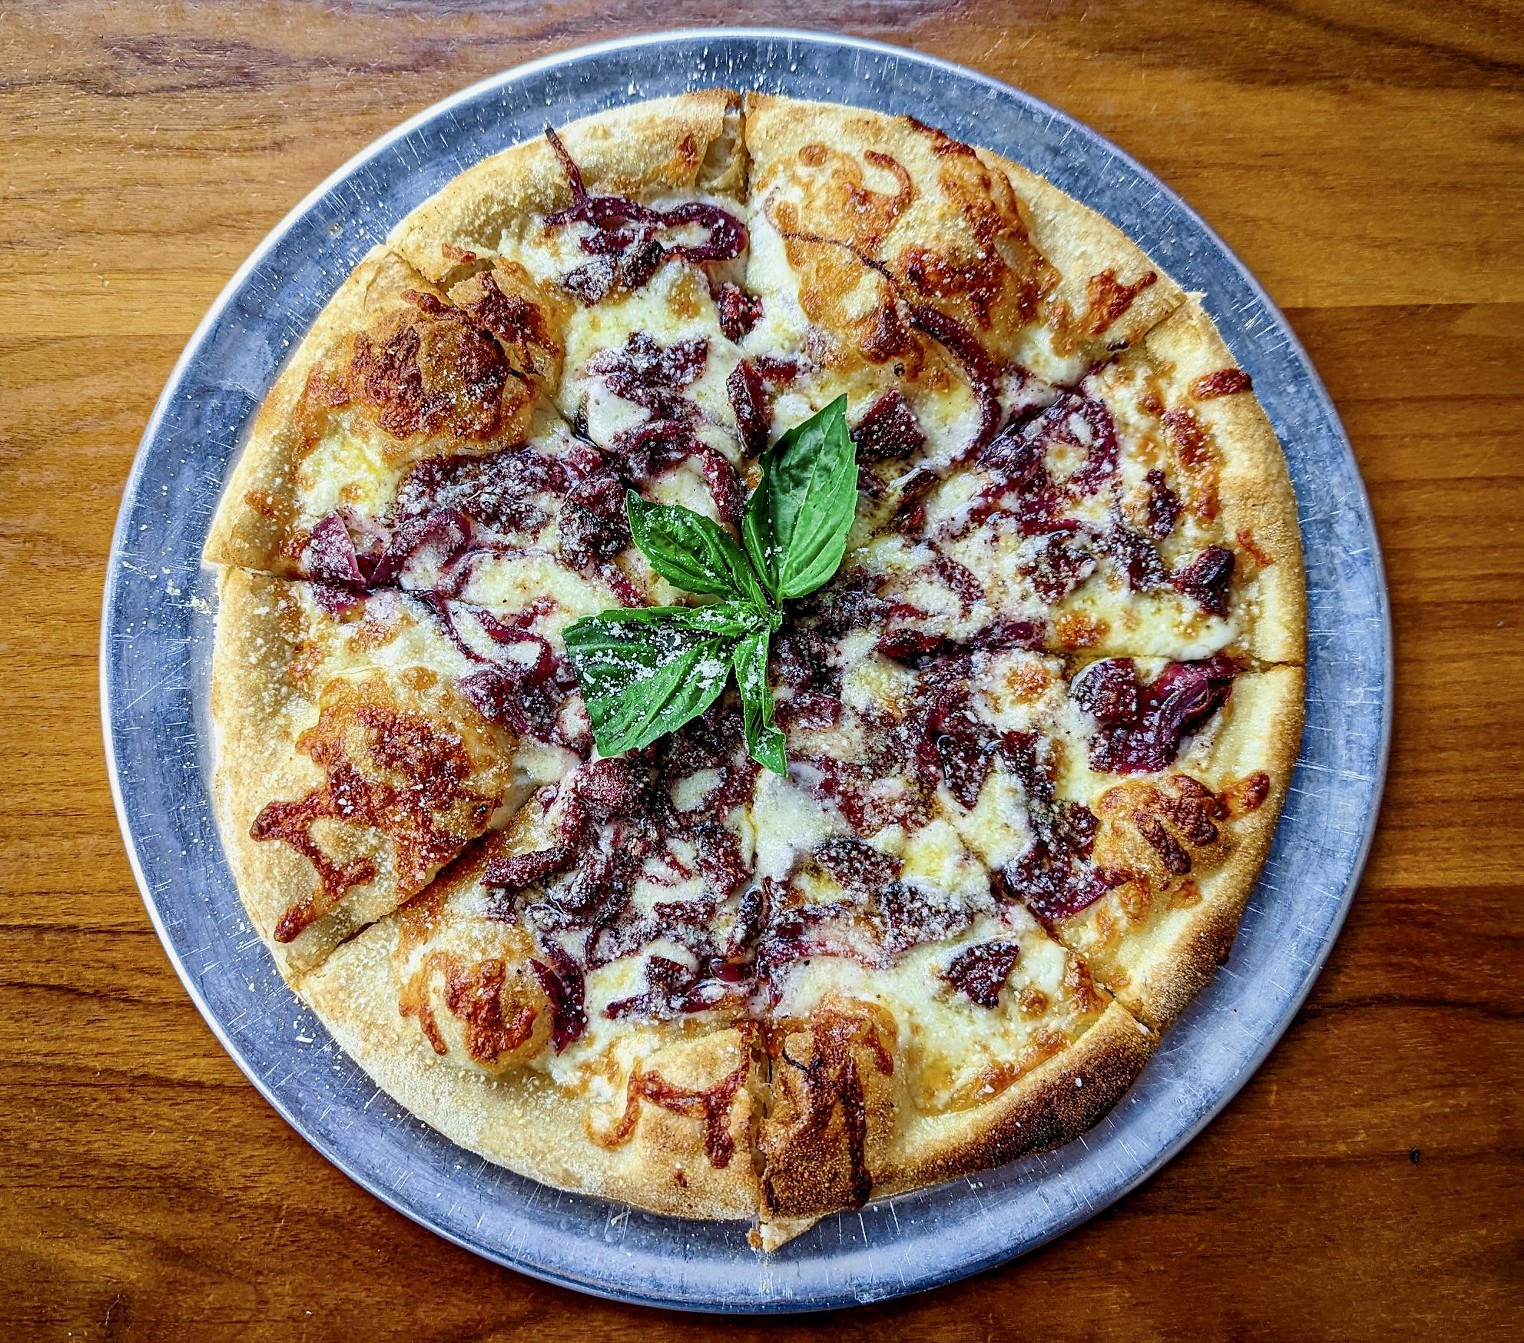 Gemini Pizza Moved Out of Bitter & Twisted, But Returns to Phoenix Soon